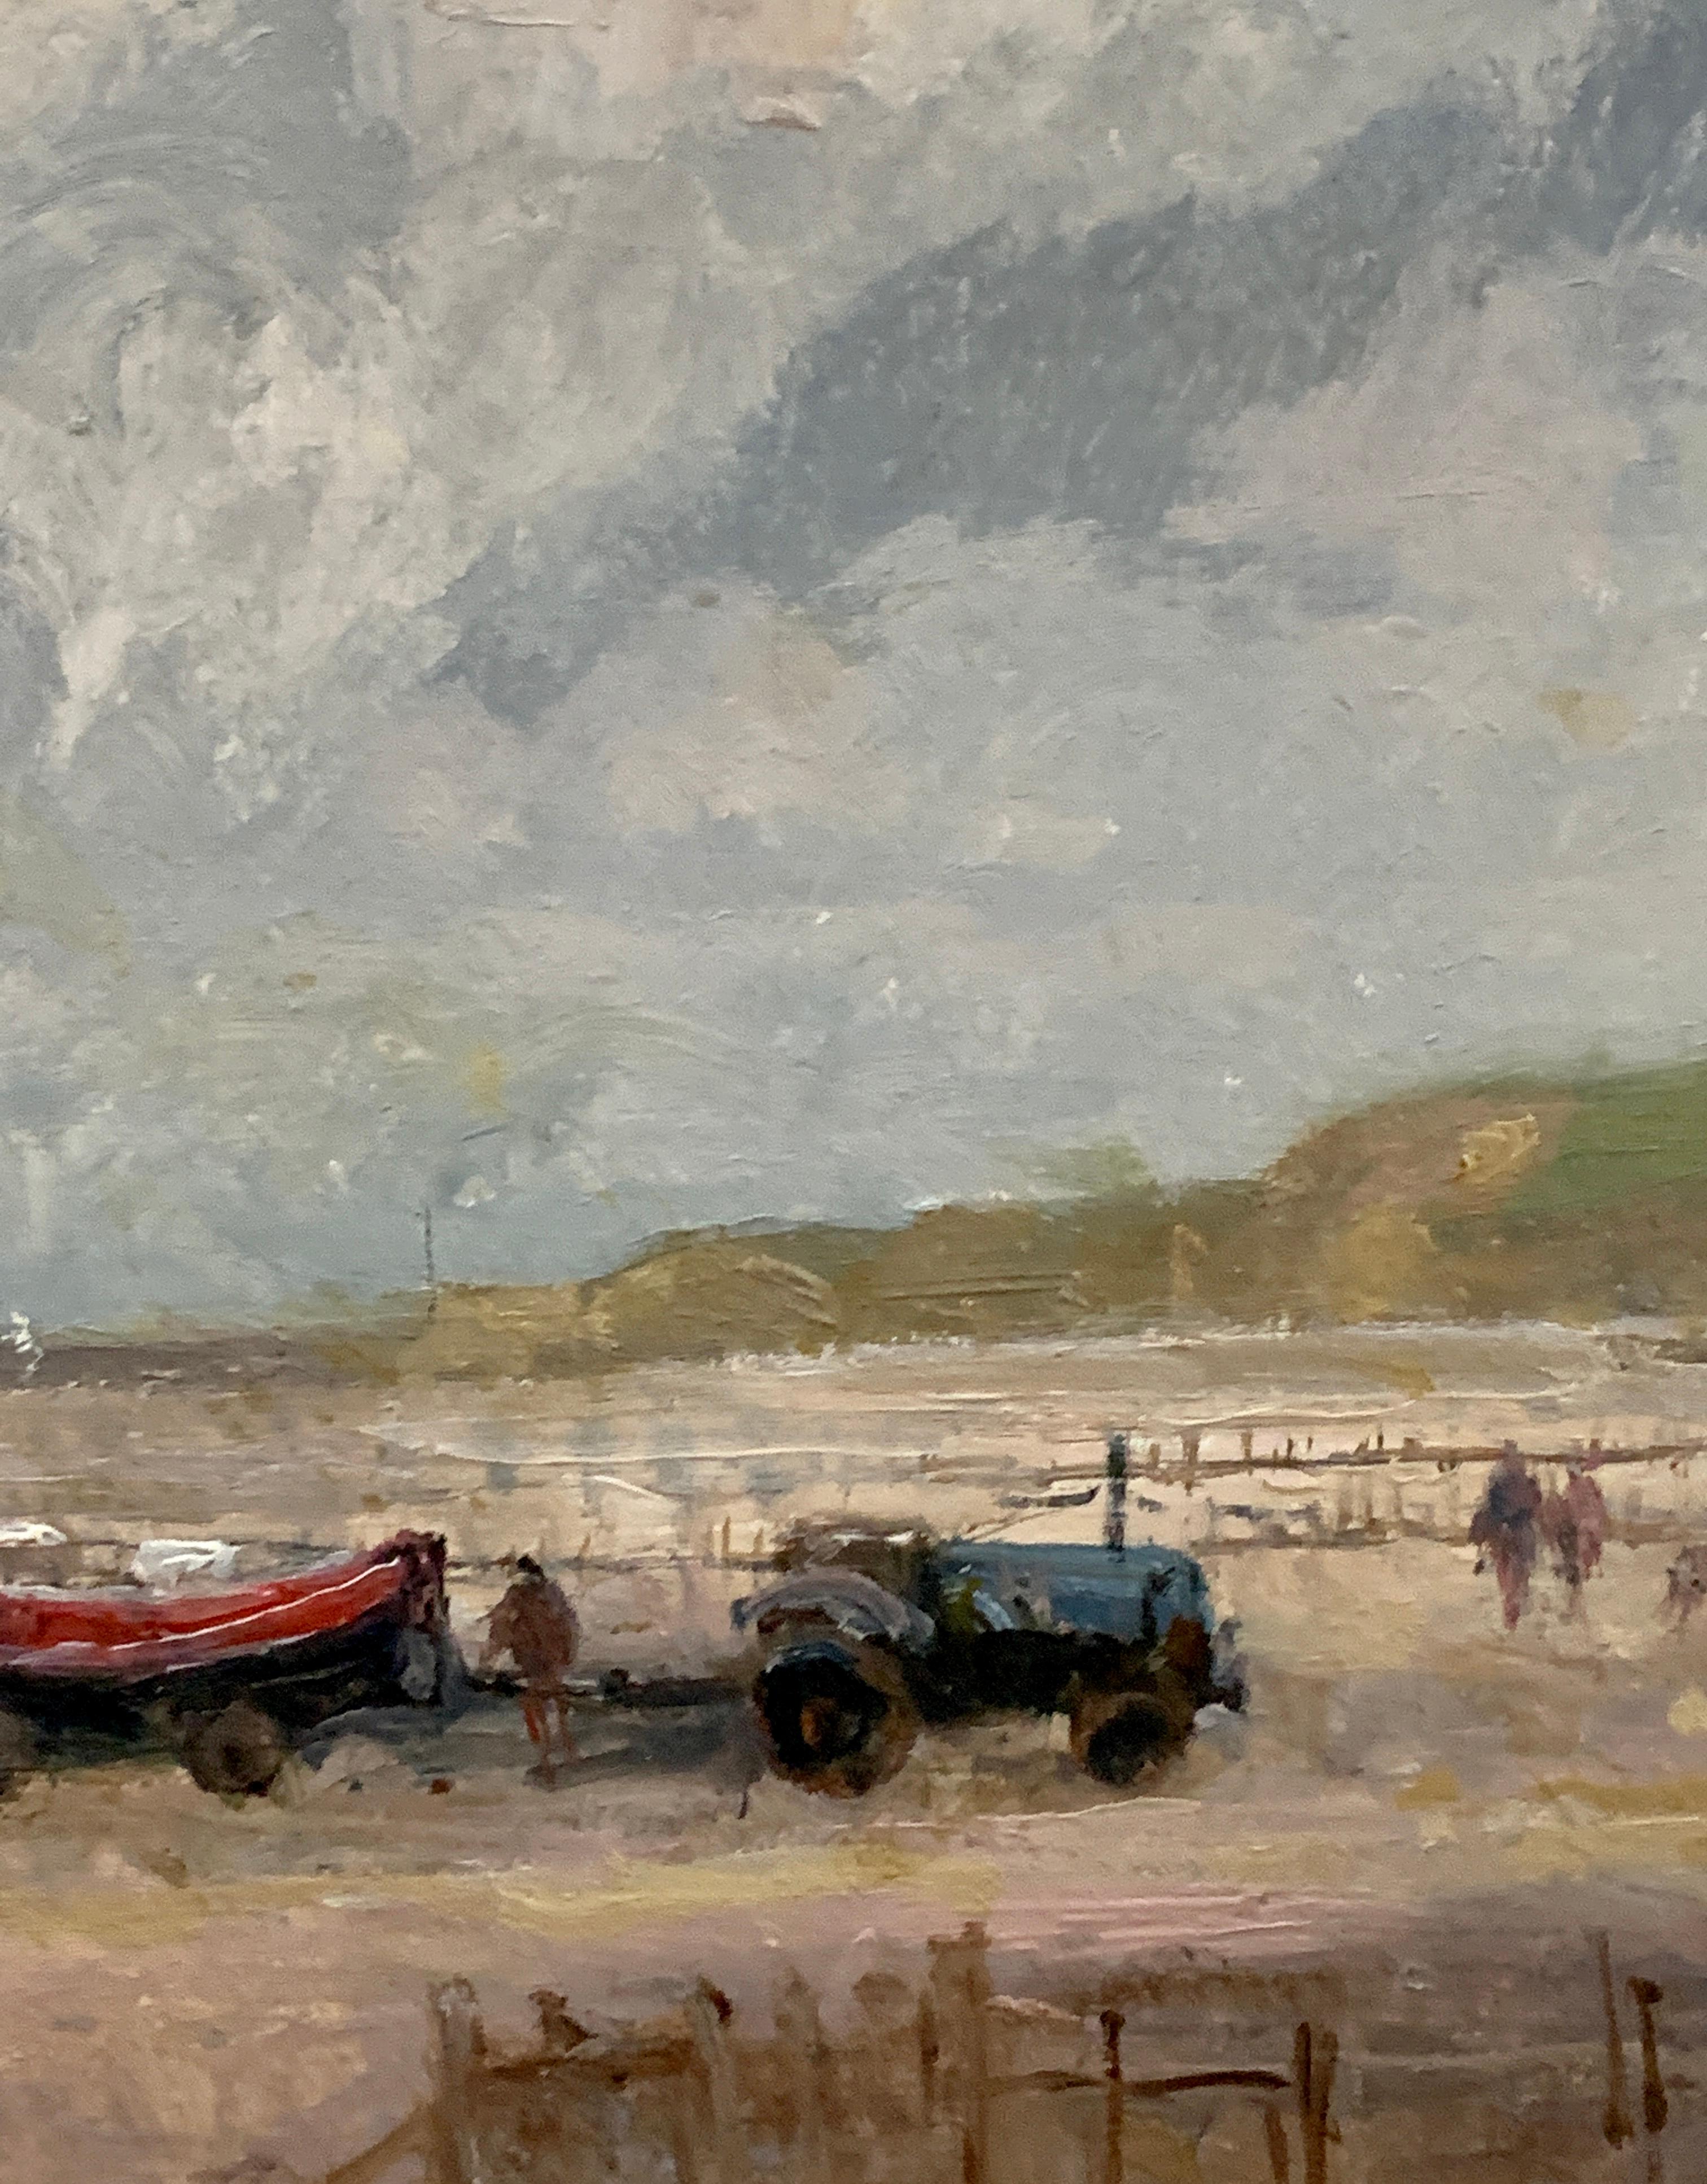  English Impressionist Coastal landscape at the beach, with a beach tractor pulling a fishing boat, Norfolk UK

Keith Arthur Johnson was born at South Pickenham, Swaffham, Norfolk in 1931, son of James Arthur Johnson (9 February 1895-1982), a